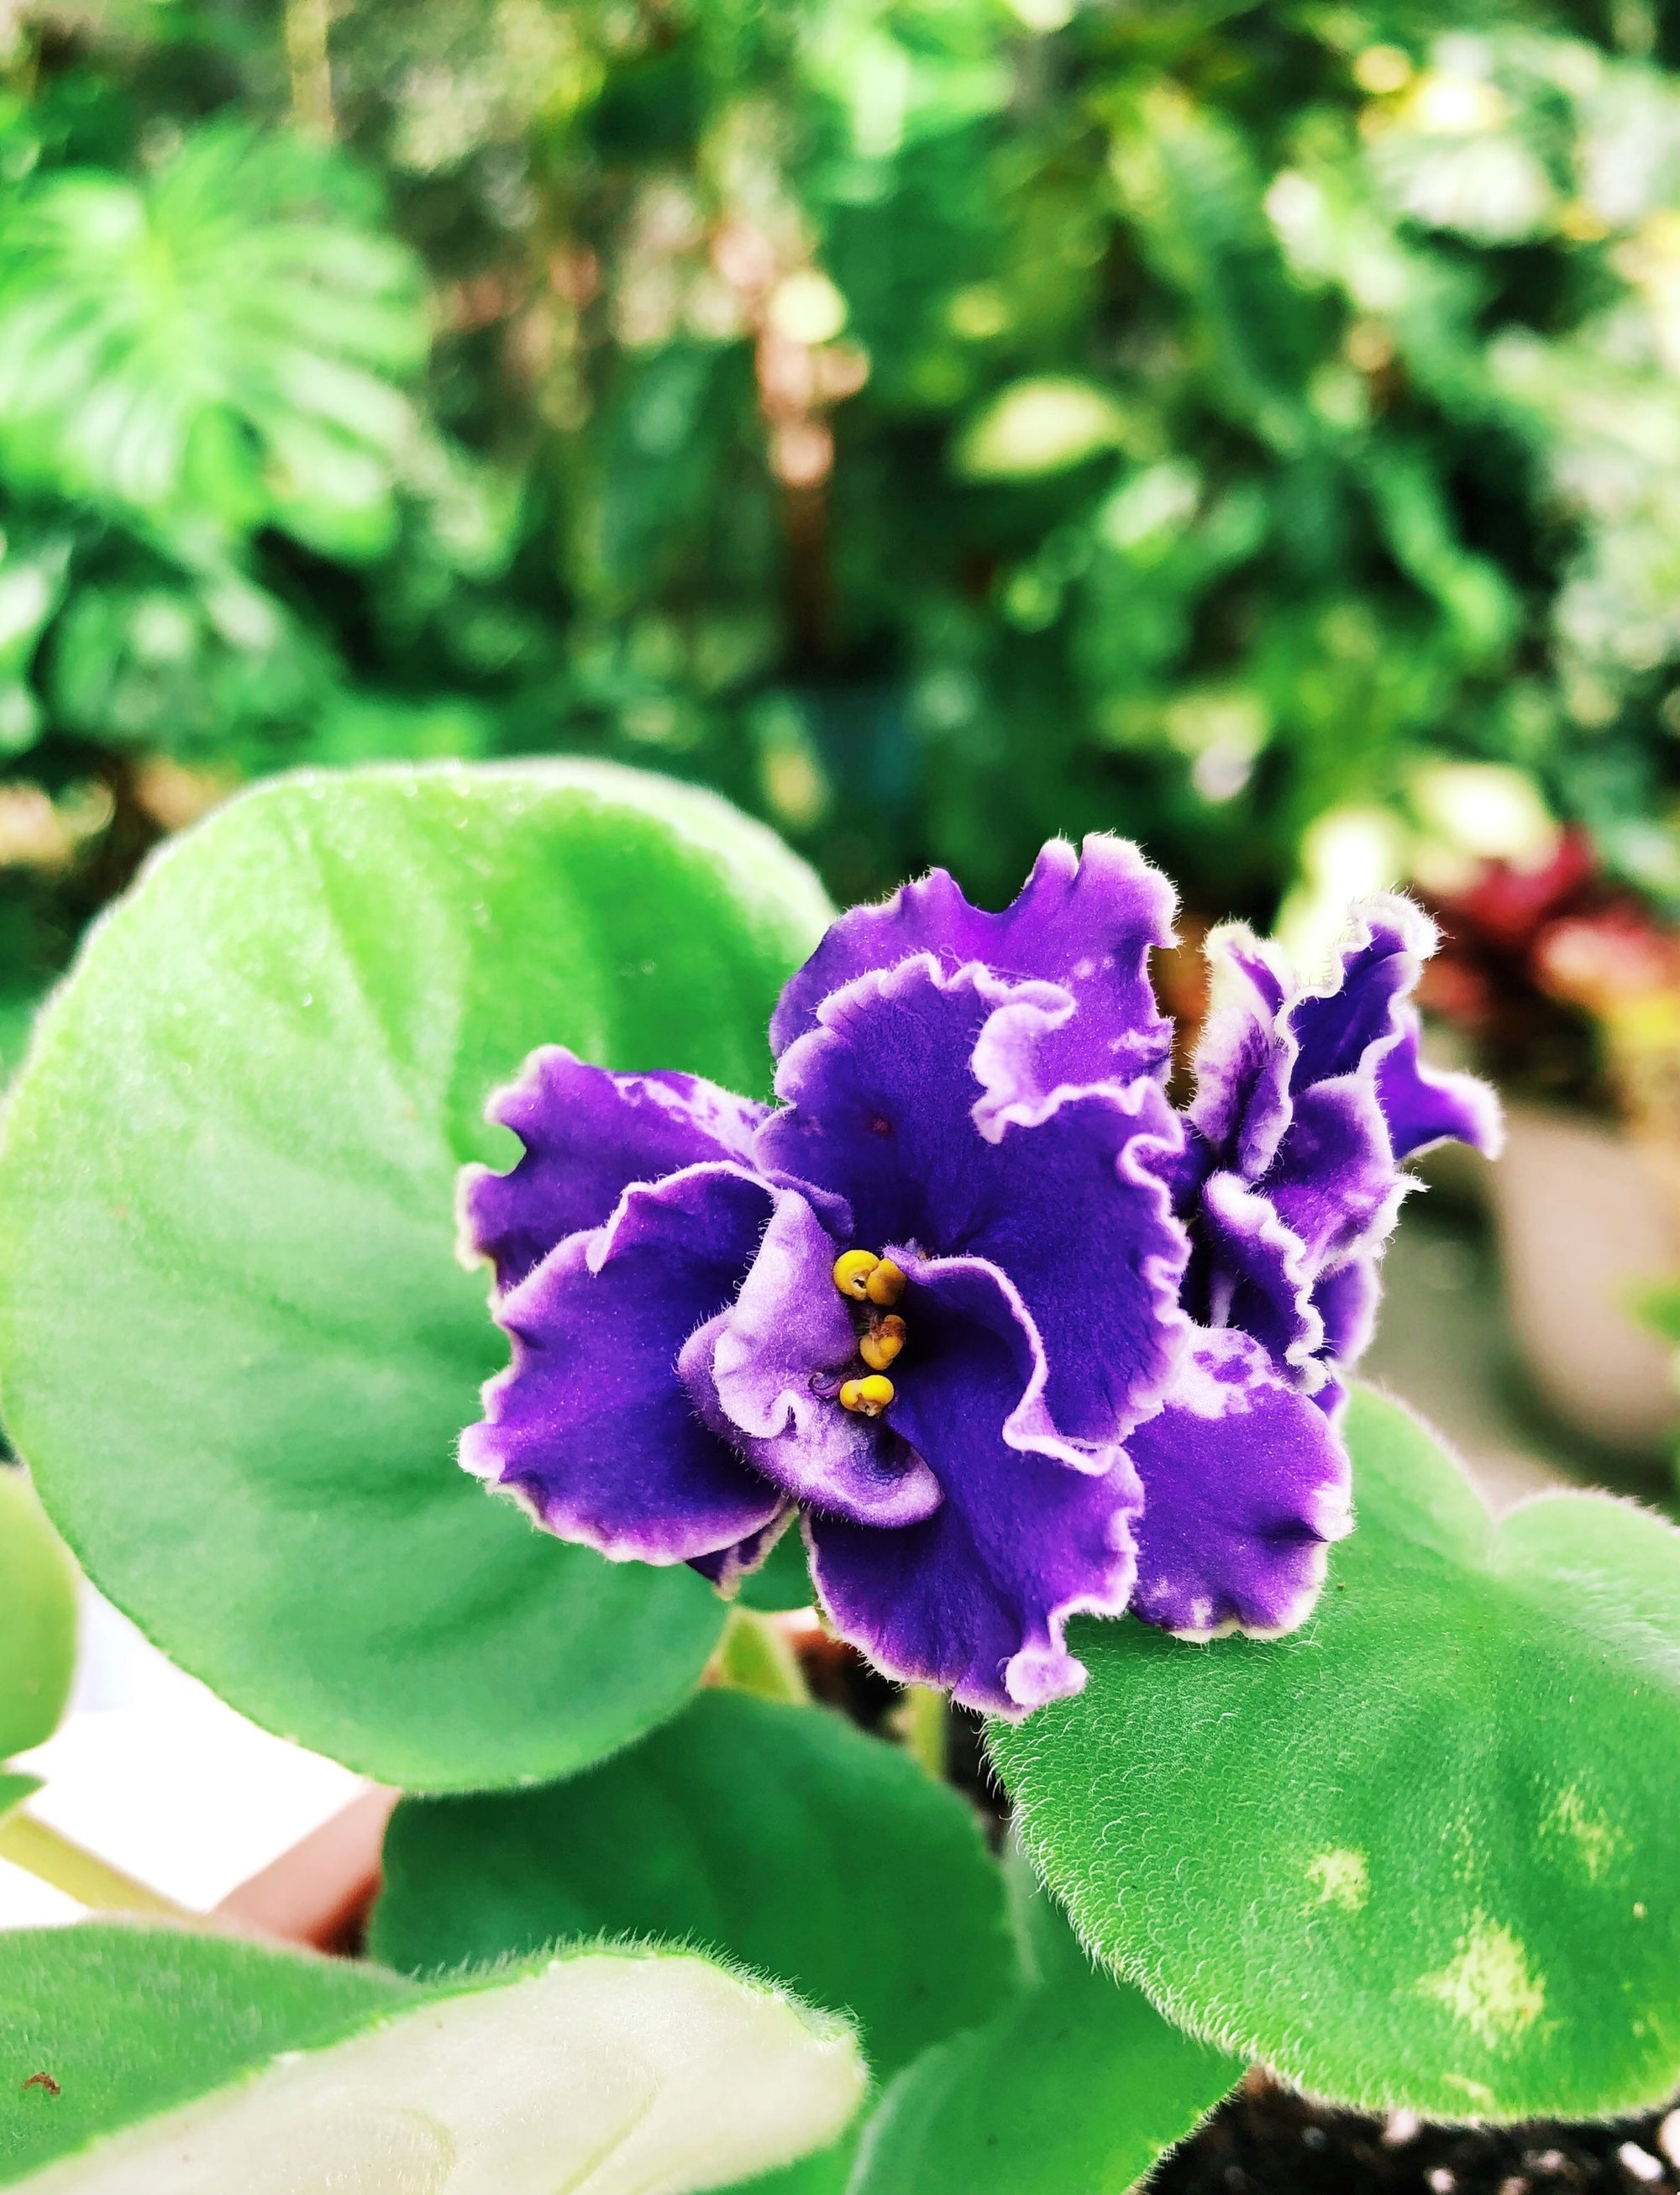 Live house plant variegated bloom Harmonys African Violet Rebels Wild Wings garden 4 in flower Potted gift